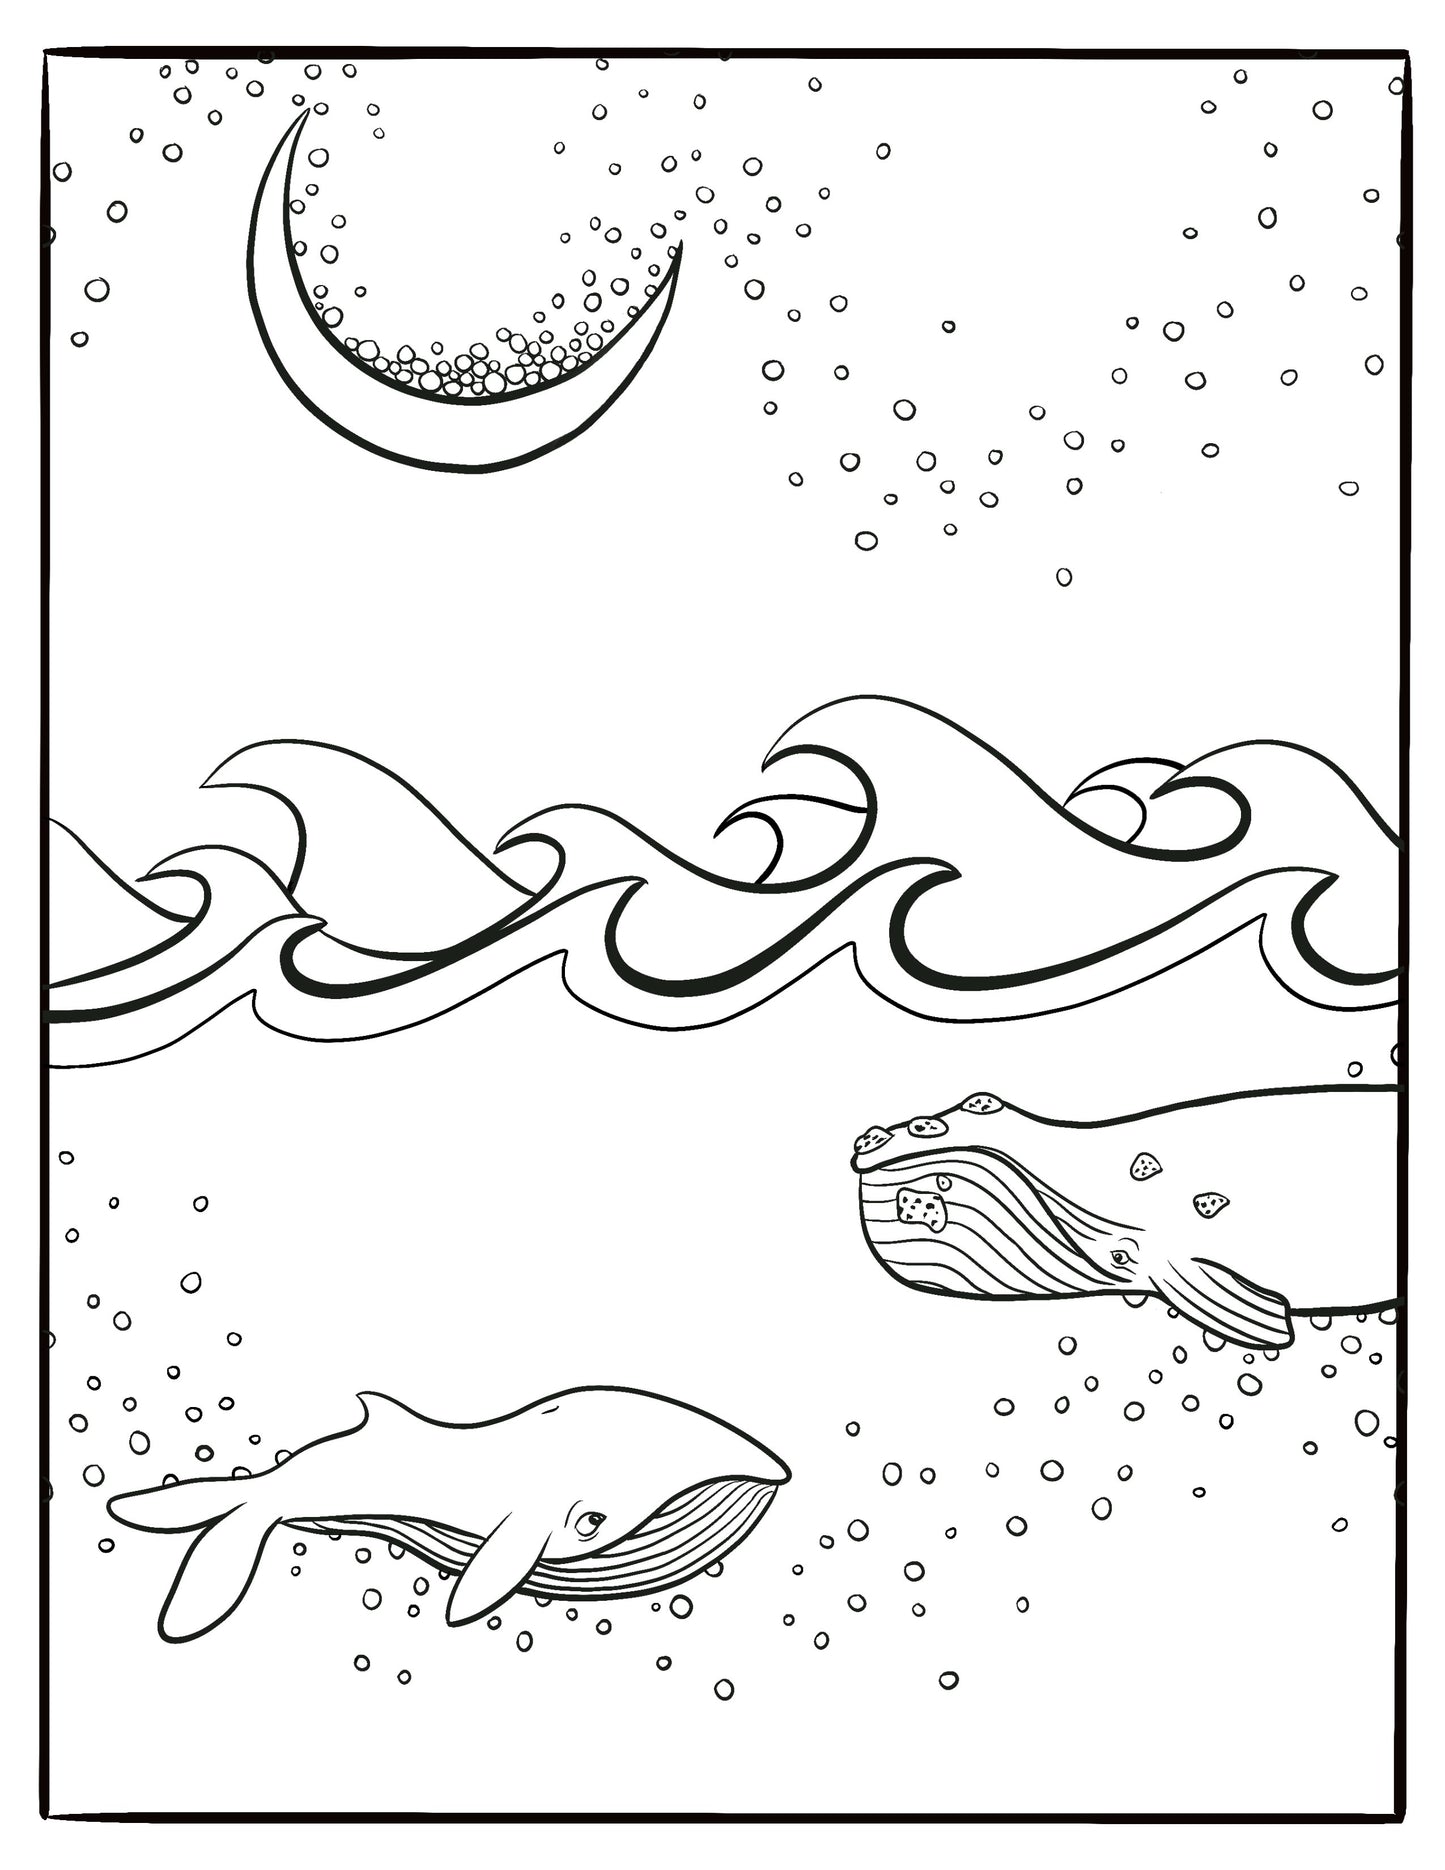 Moon Illustration Series Coloring Pages (Print At Home!)